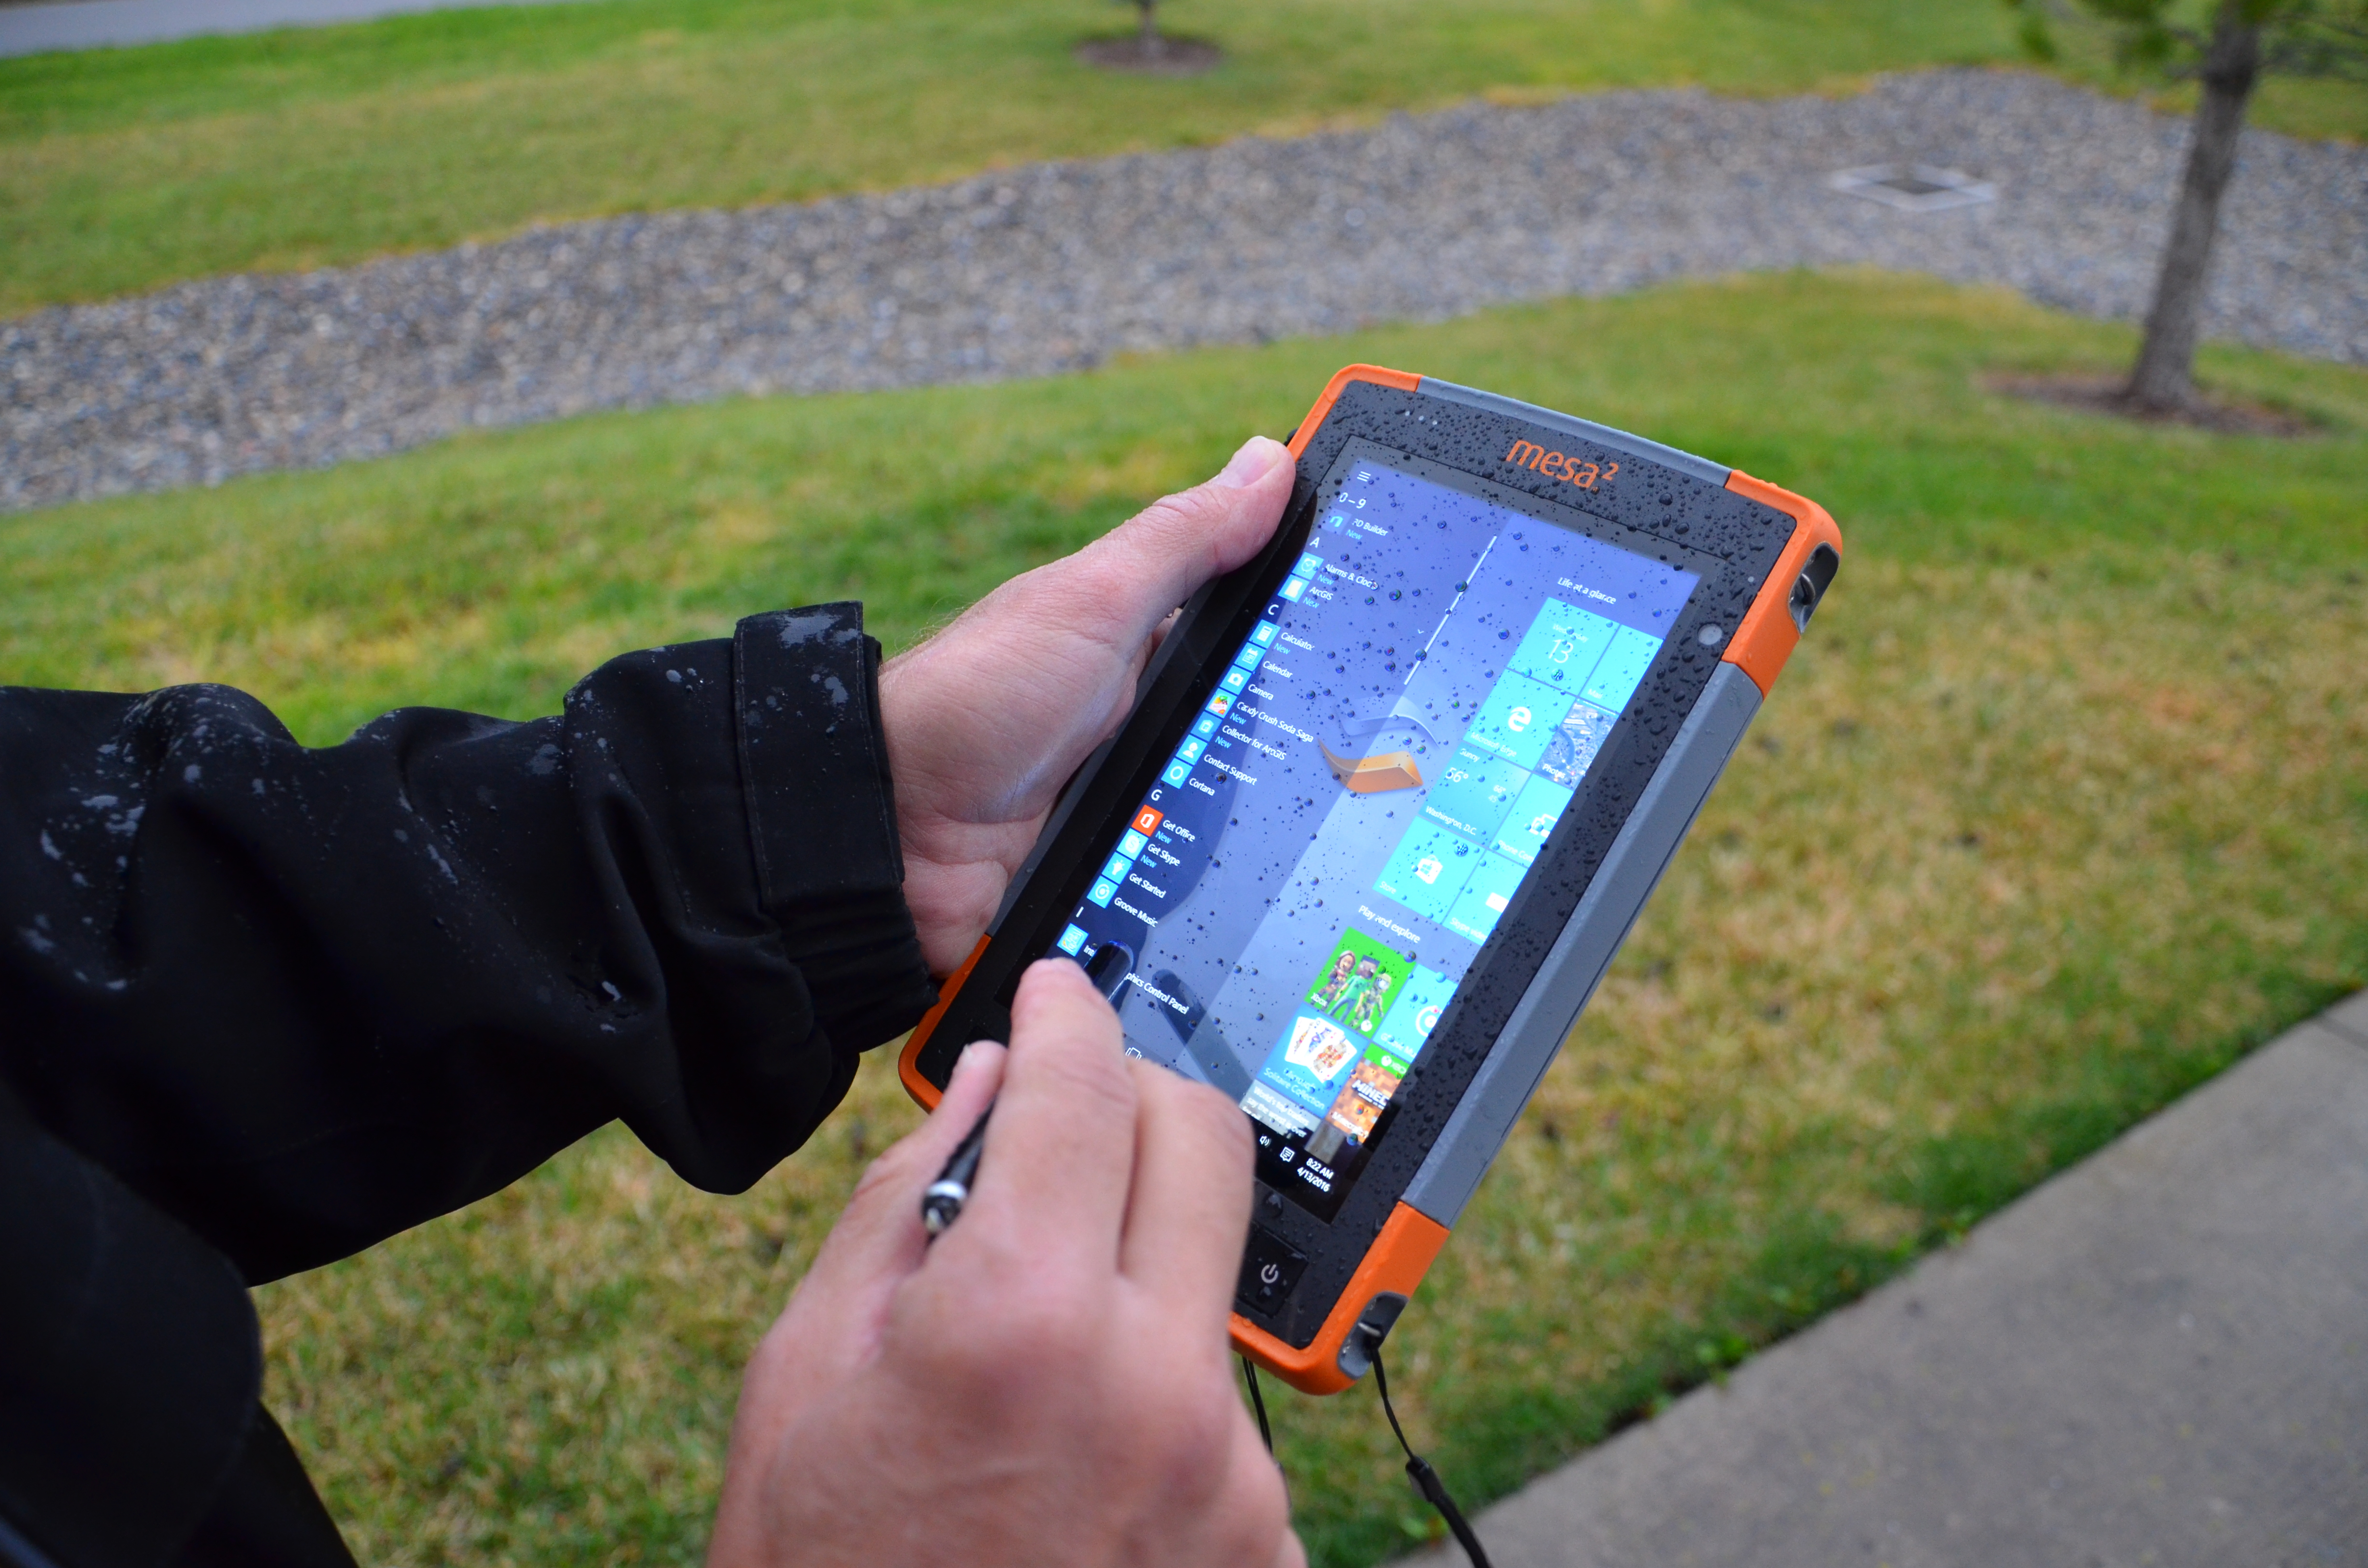 Capacitive touch screen in rain and wet conditions